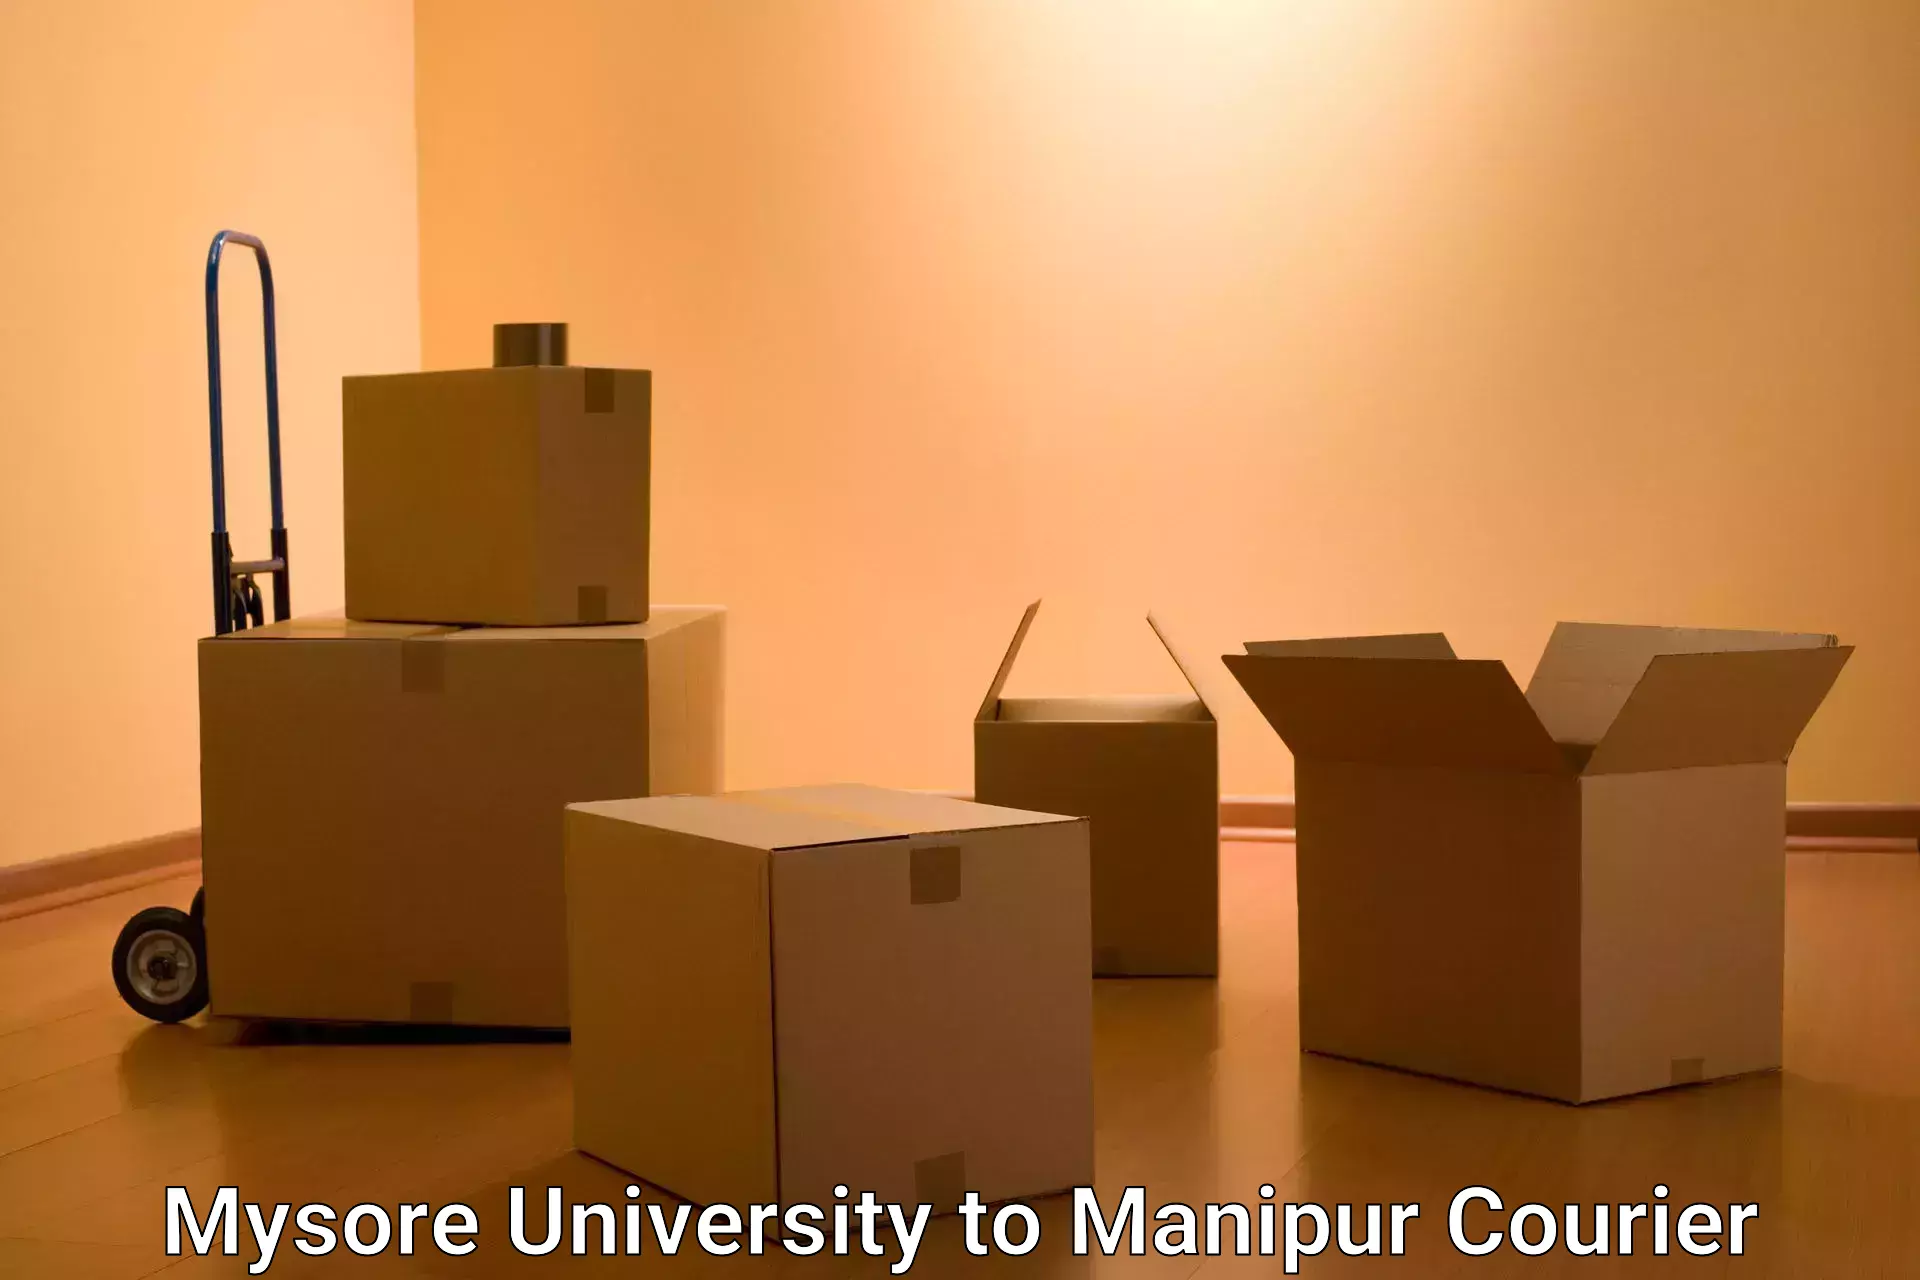 Courier service booking Mysore University to NIT Manipur